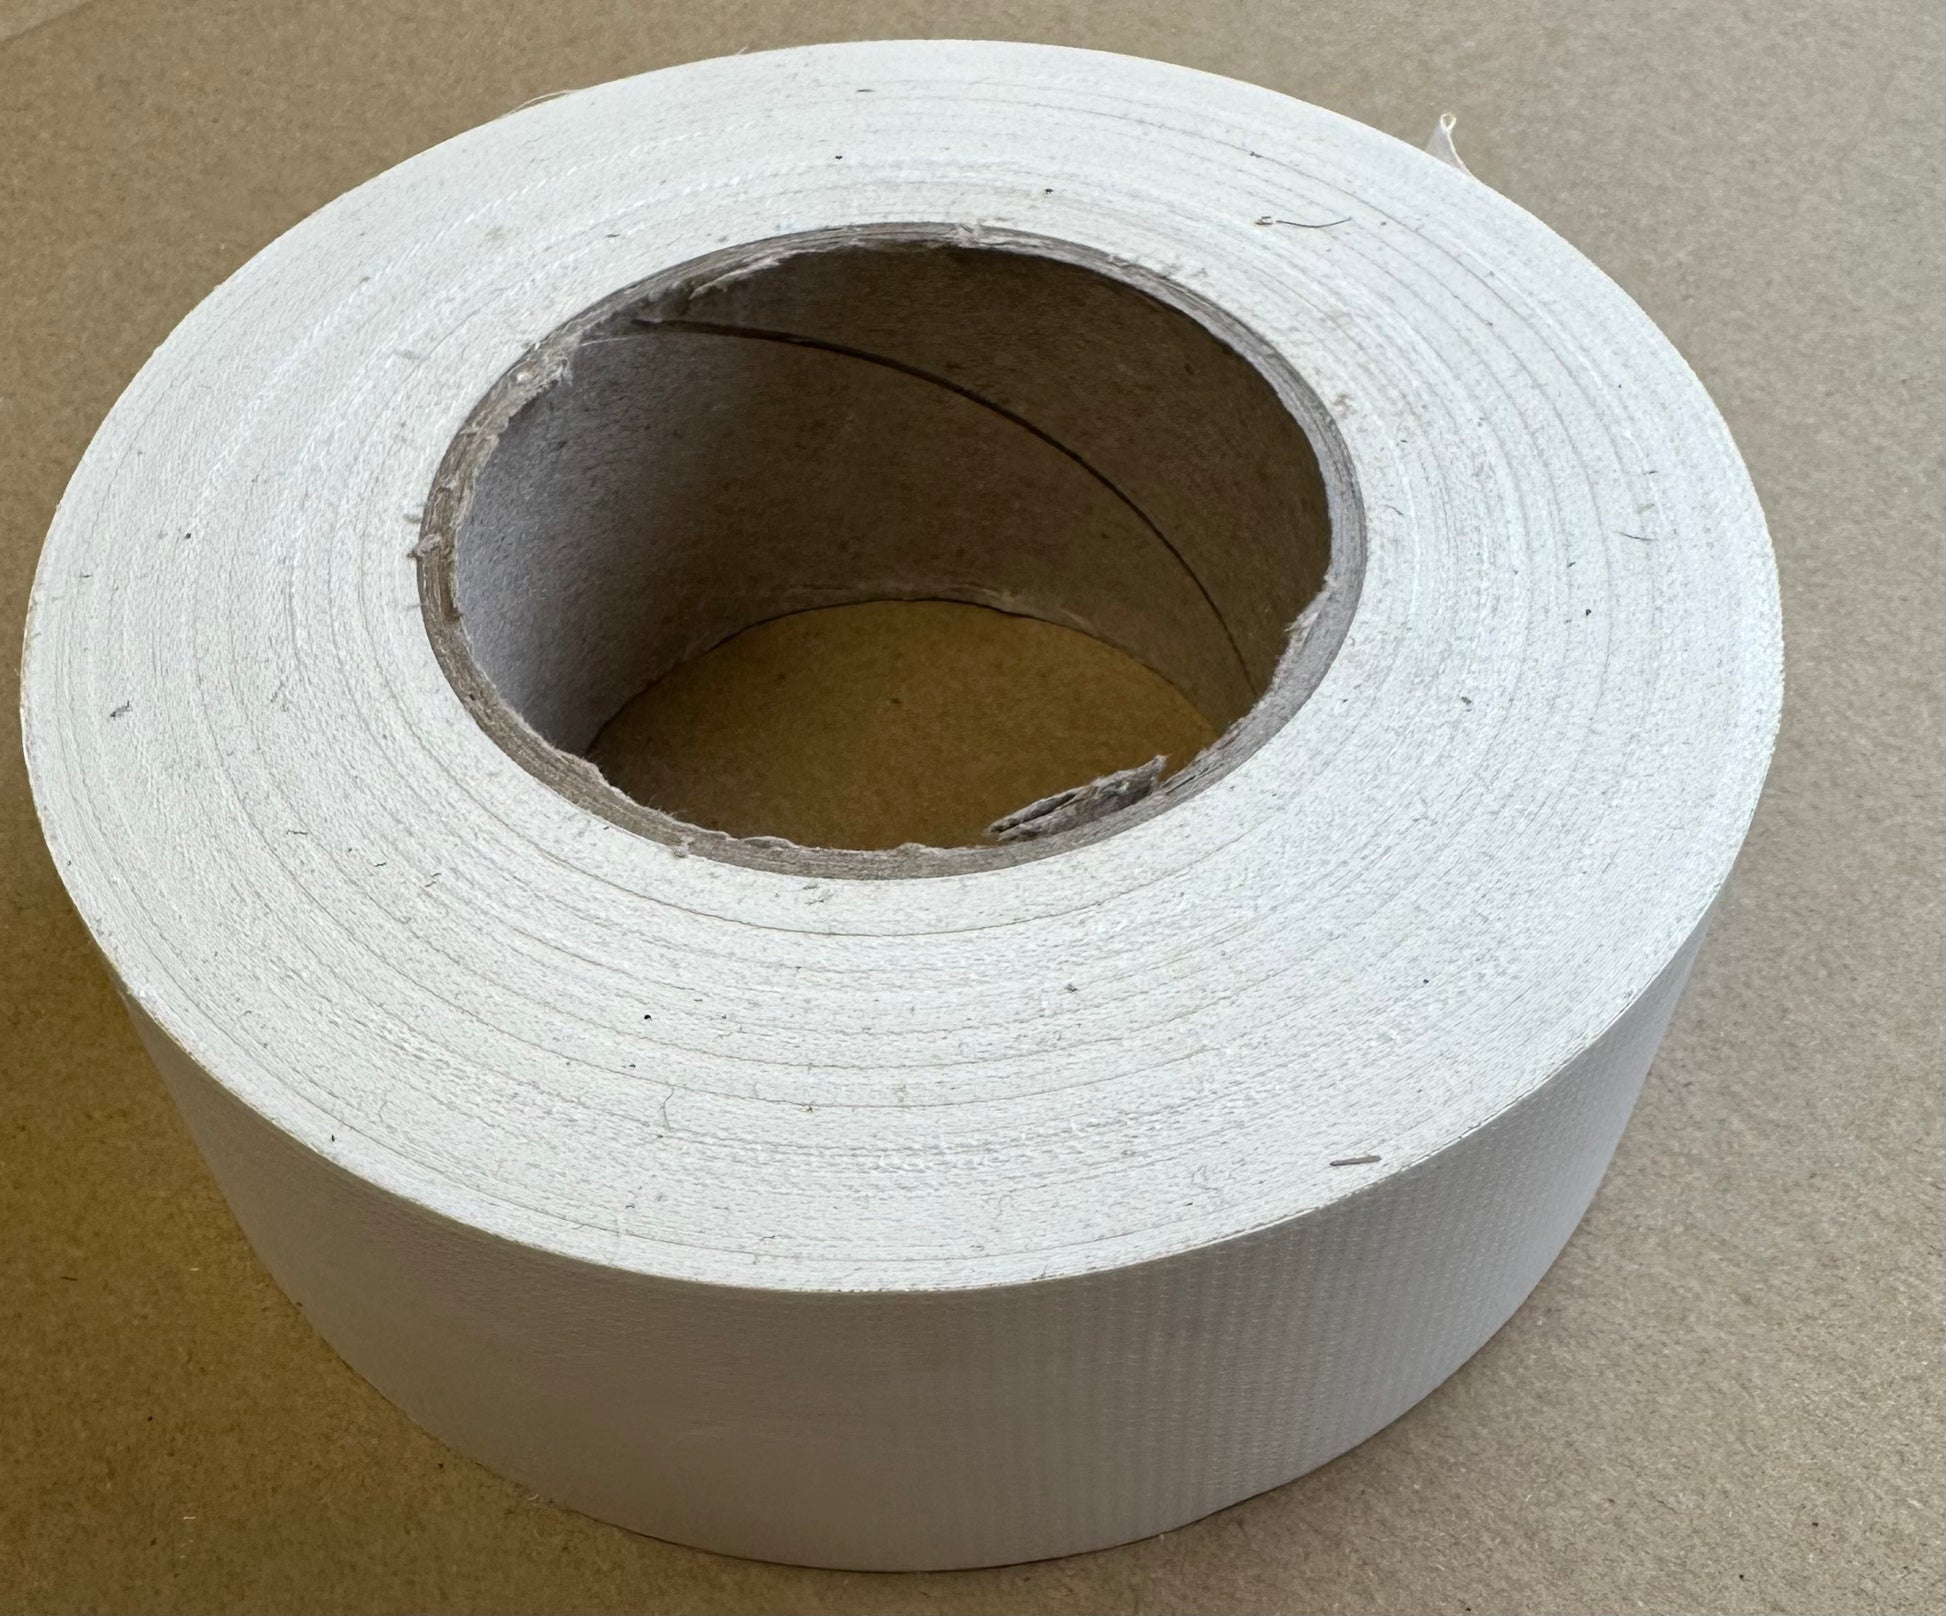 Duct sealing tape for sealing air ducts, reinforced  tape with strong adhesive.